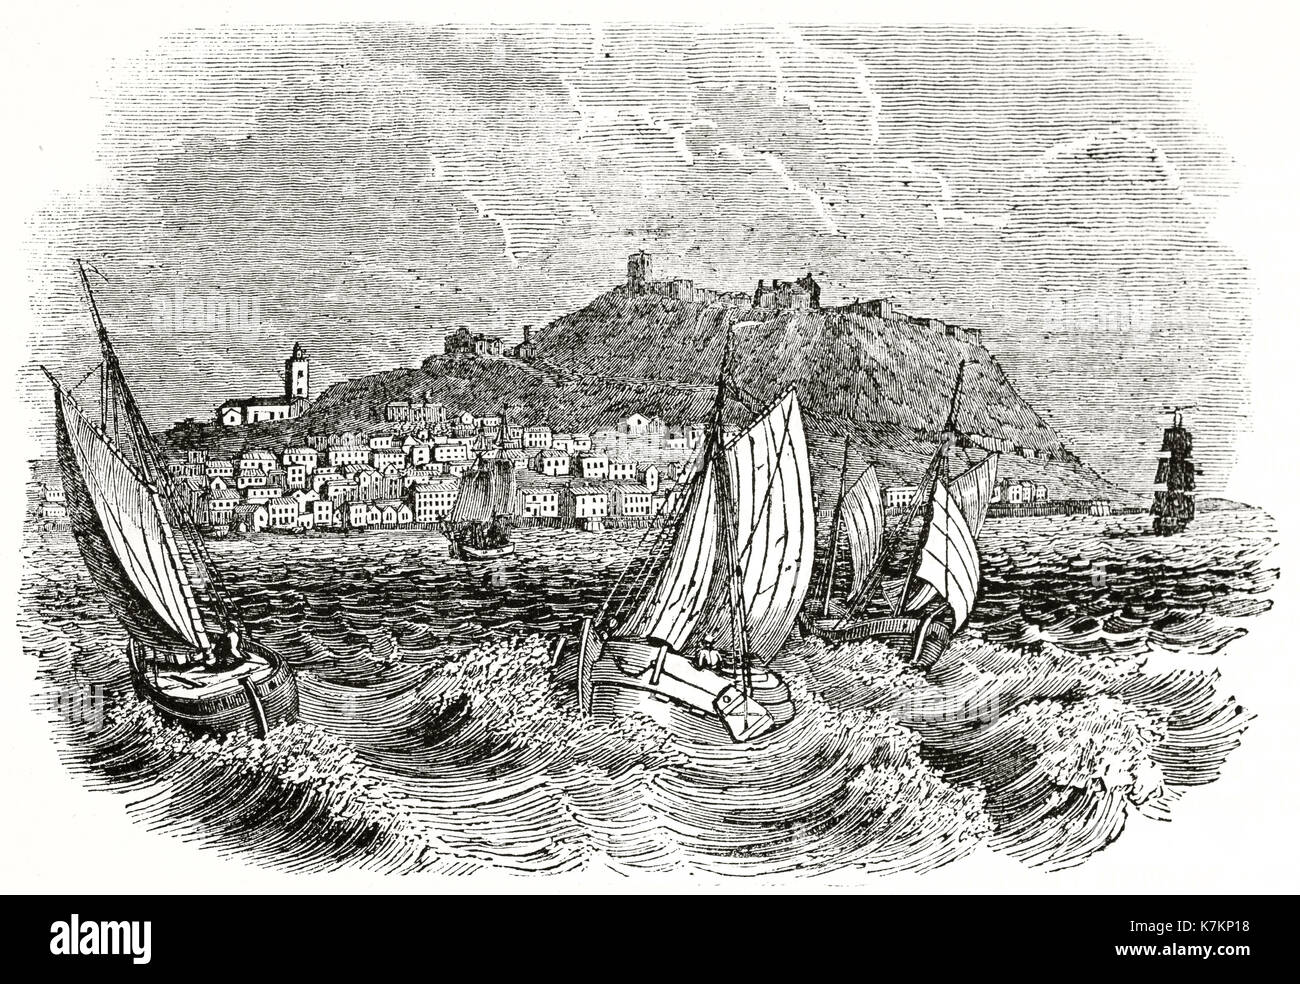 Old view of Scarborough, England. By unidentified author, publ. on The Penny Magazine, London, 1837 Stock Photo